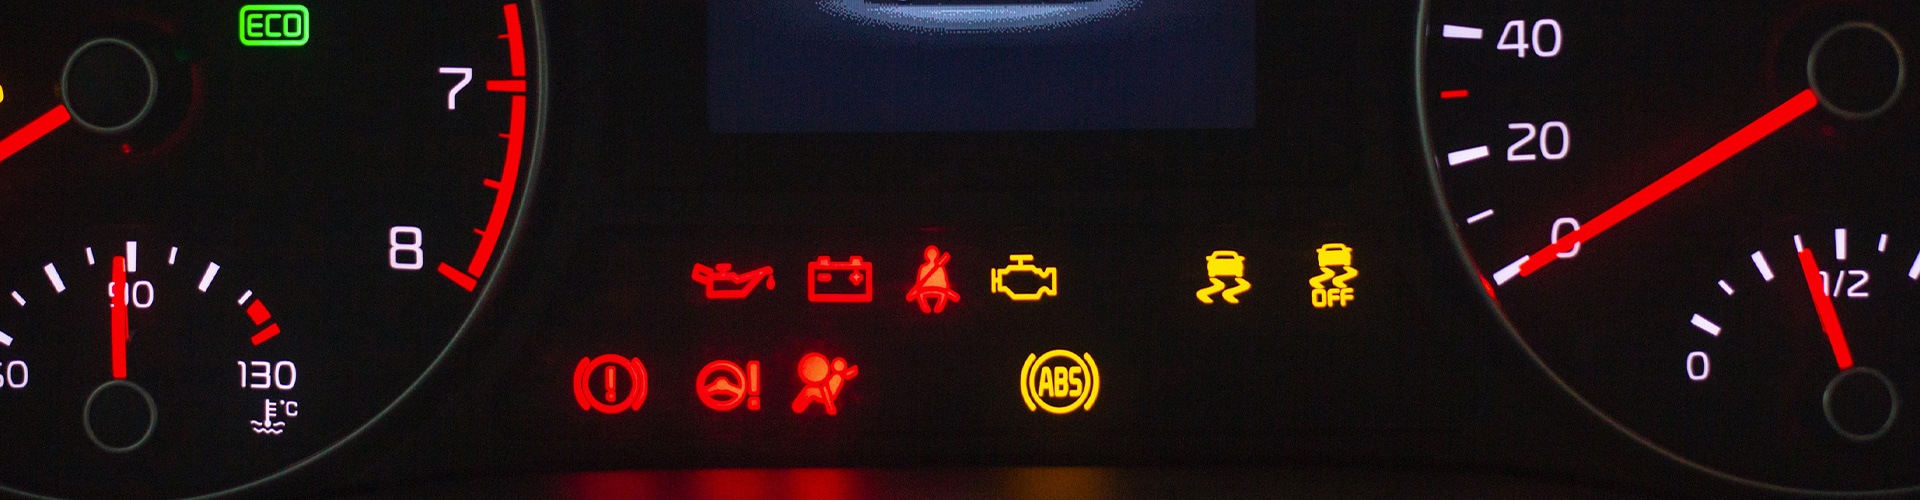 Dashboard of a car showing multiple warning lights, including a check engine and low oil light.